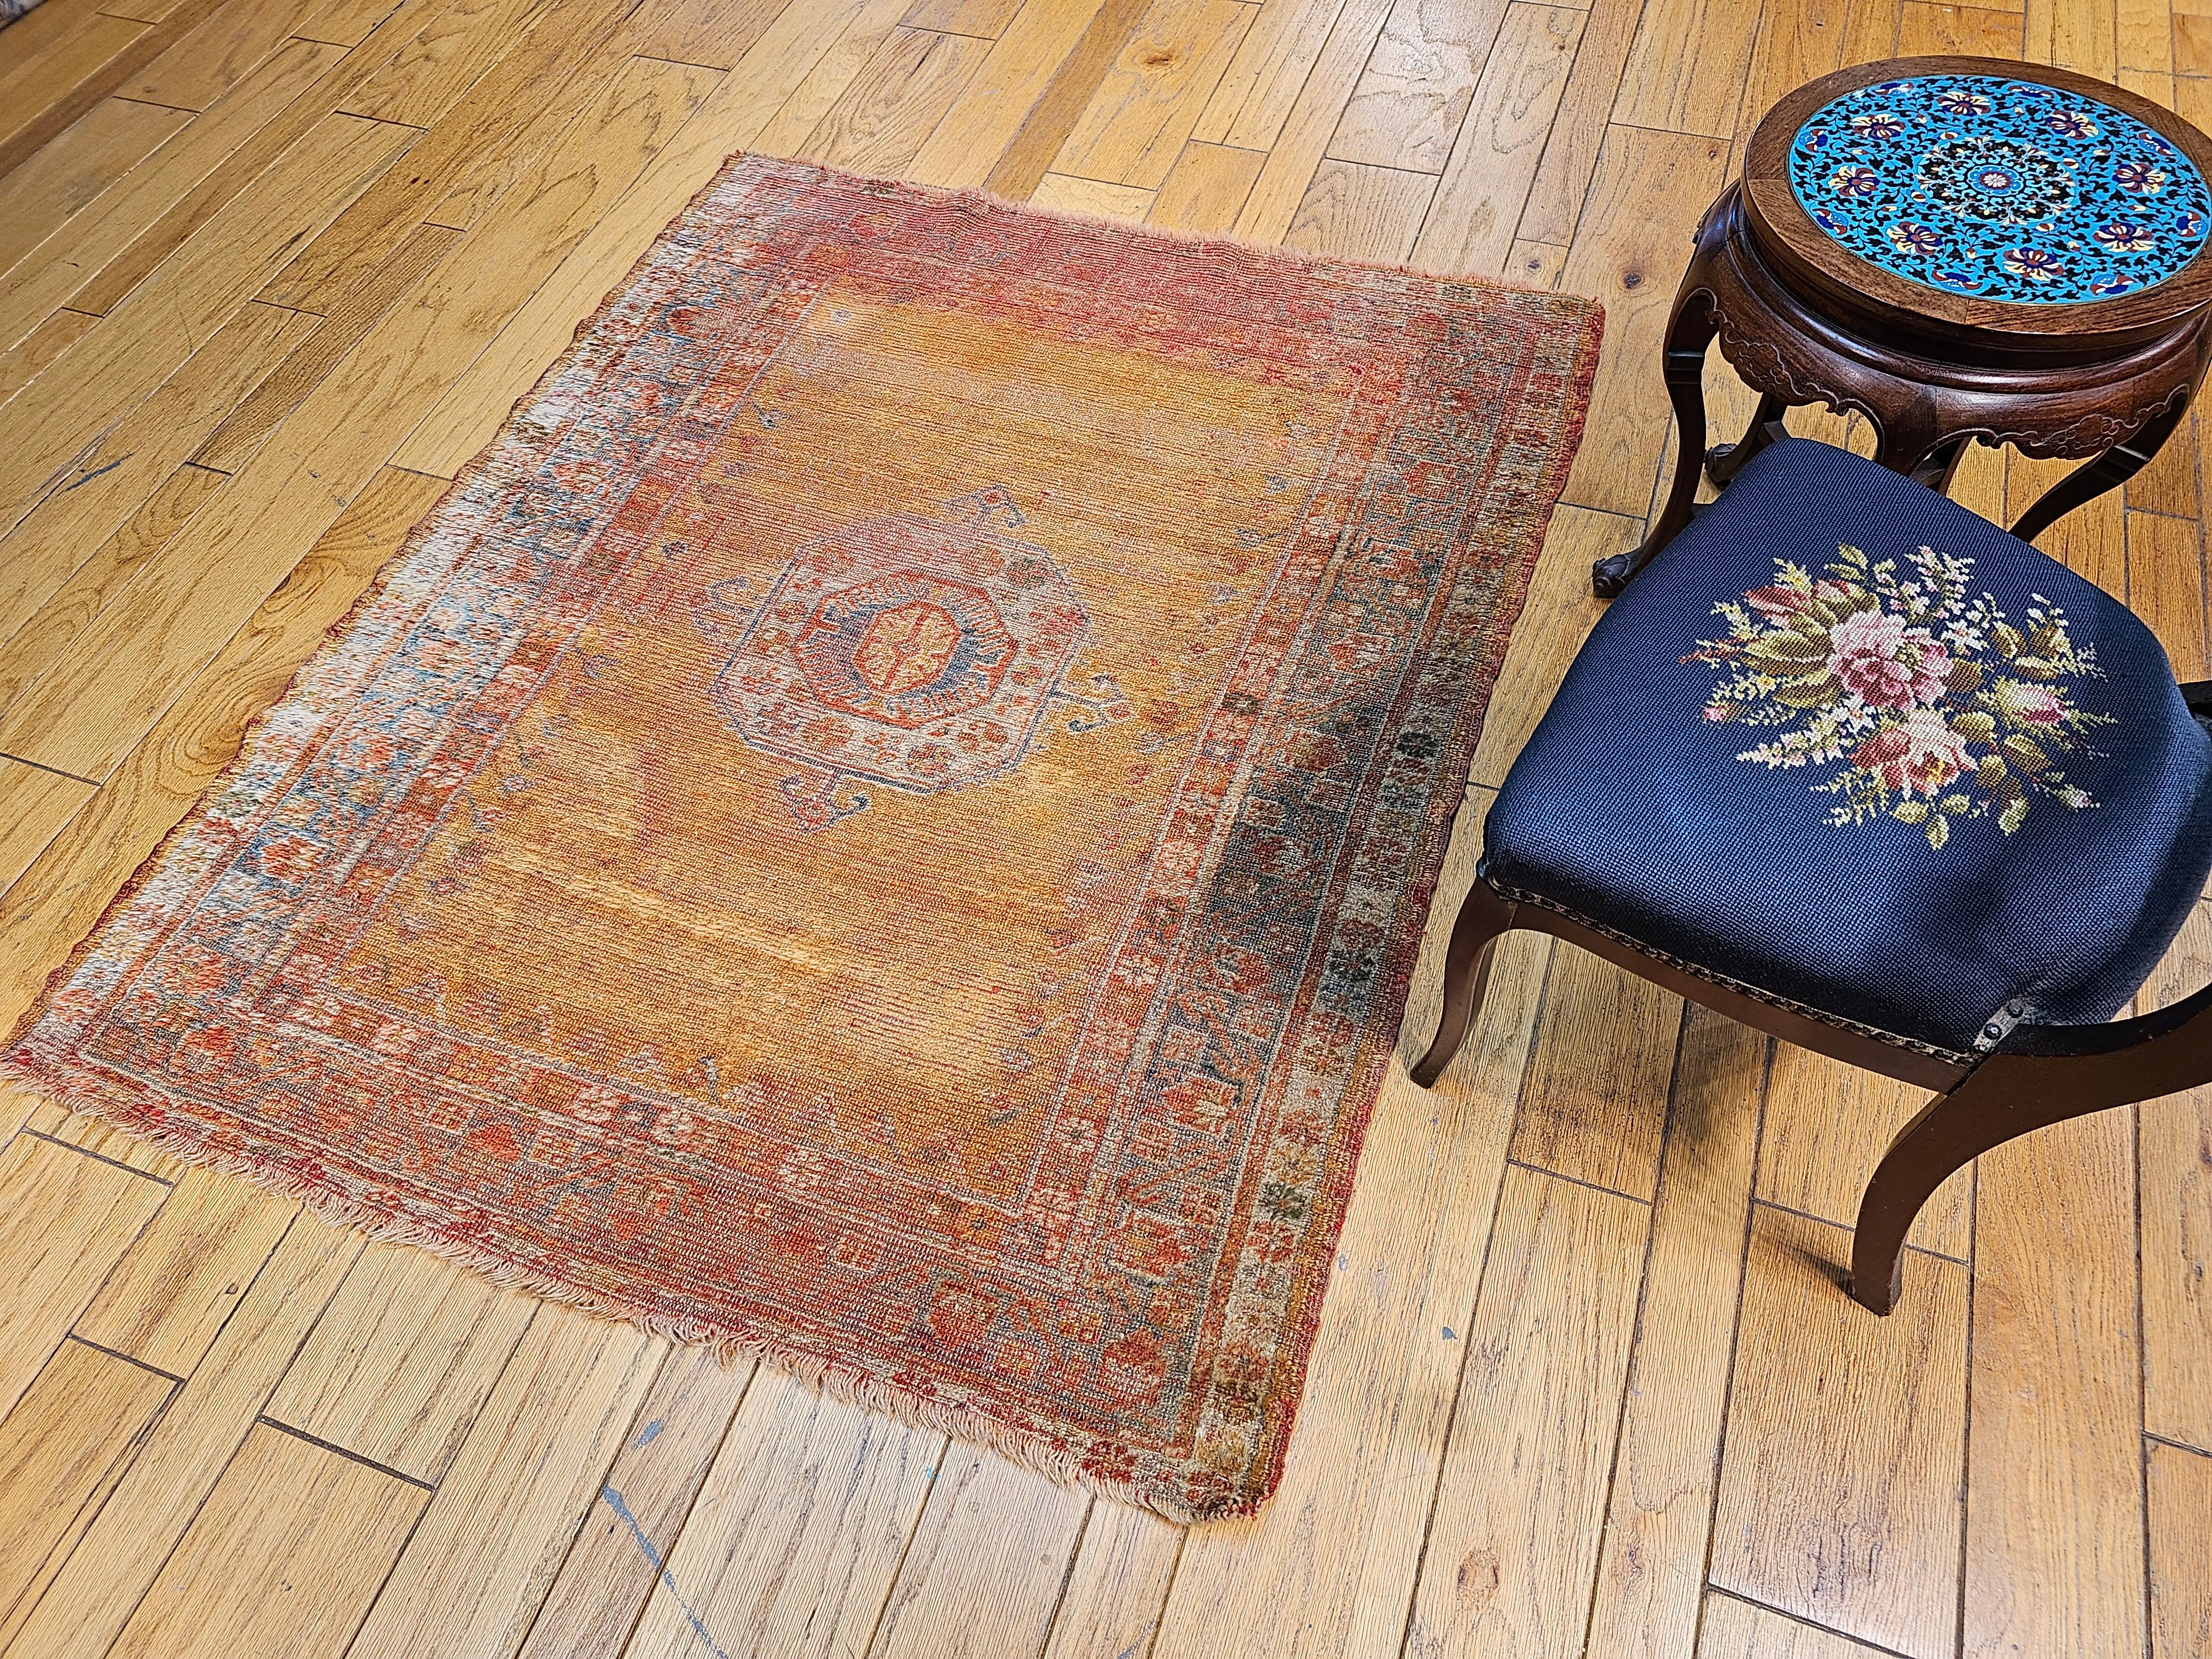 Late 19th Century Turkish Oushak Area Rug in Mamluk Pattern in Saffron, Teal For Sale 10